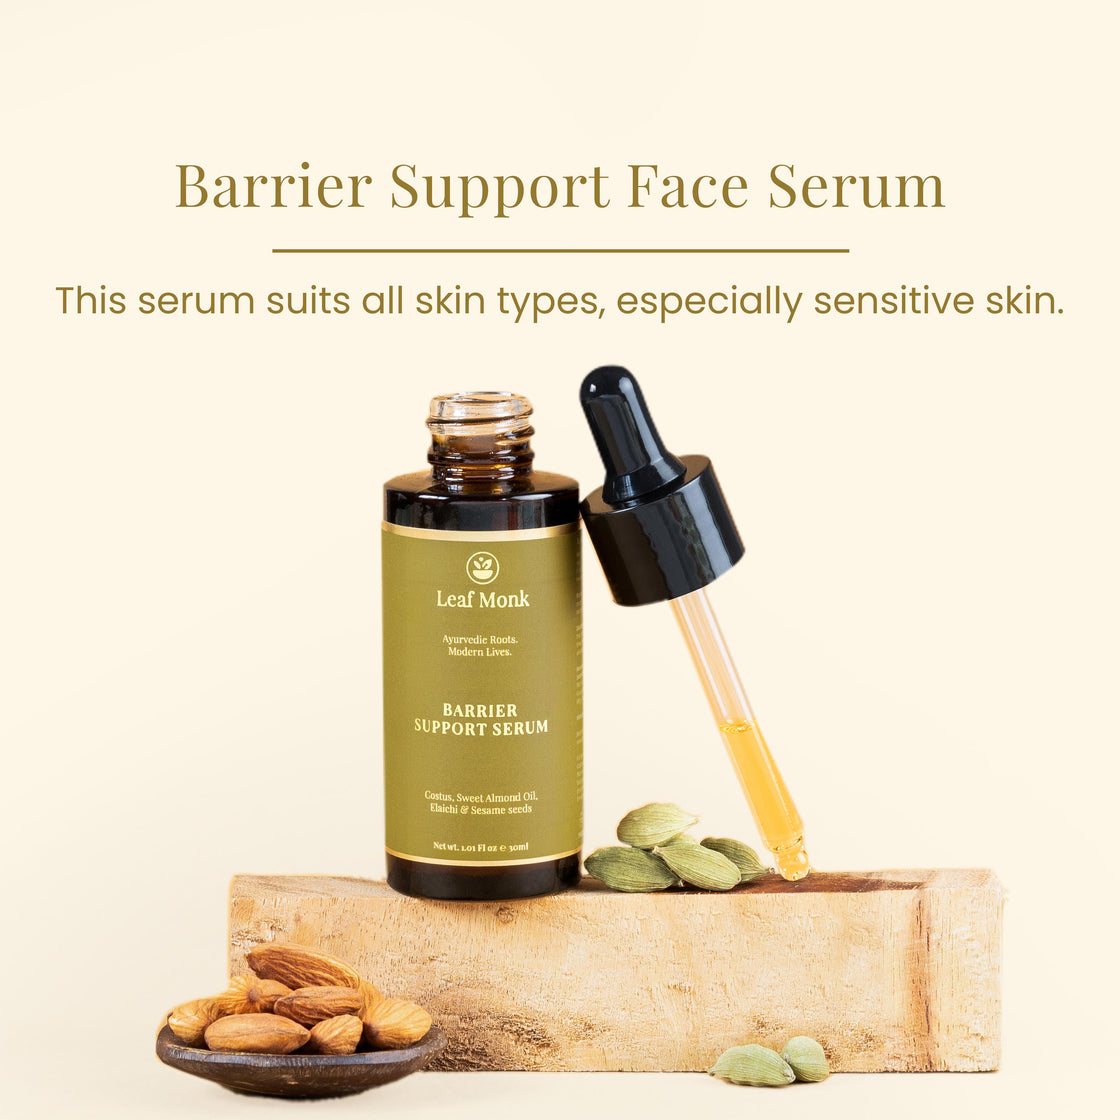 Barrier Support Face Serum with Costus, Sweet Almond Oil, Elaichi & Sesame seeds Oil